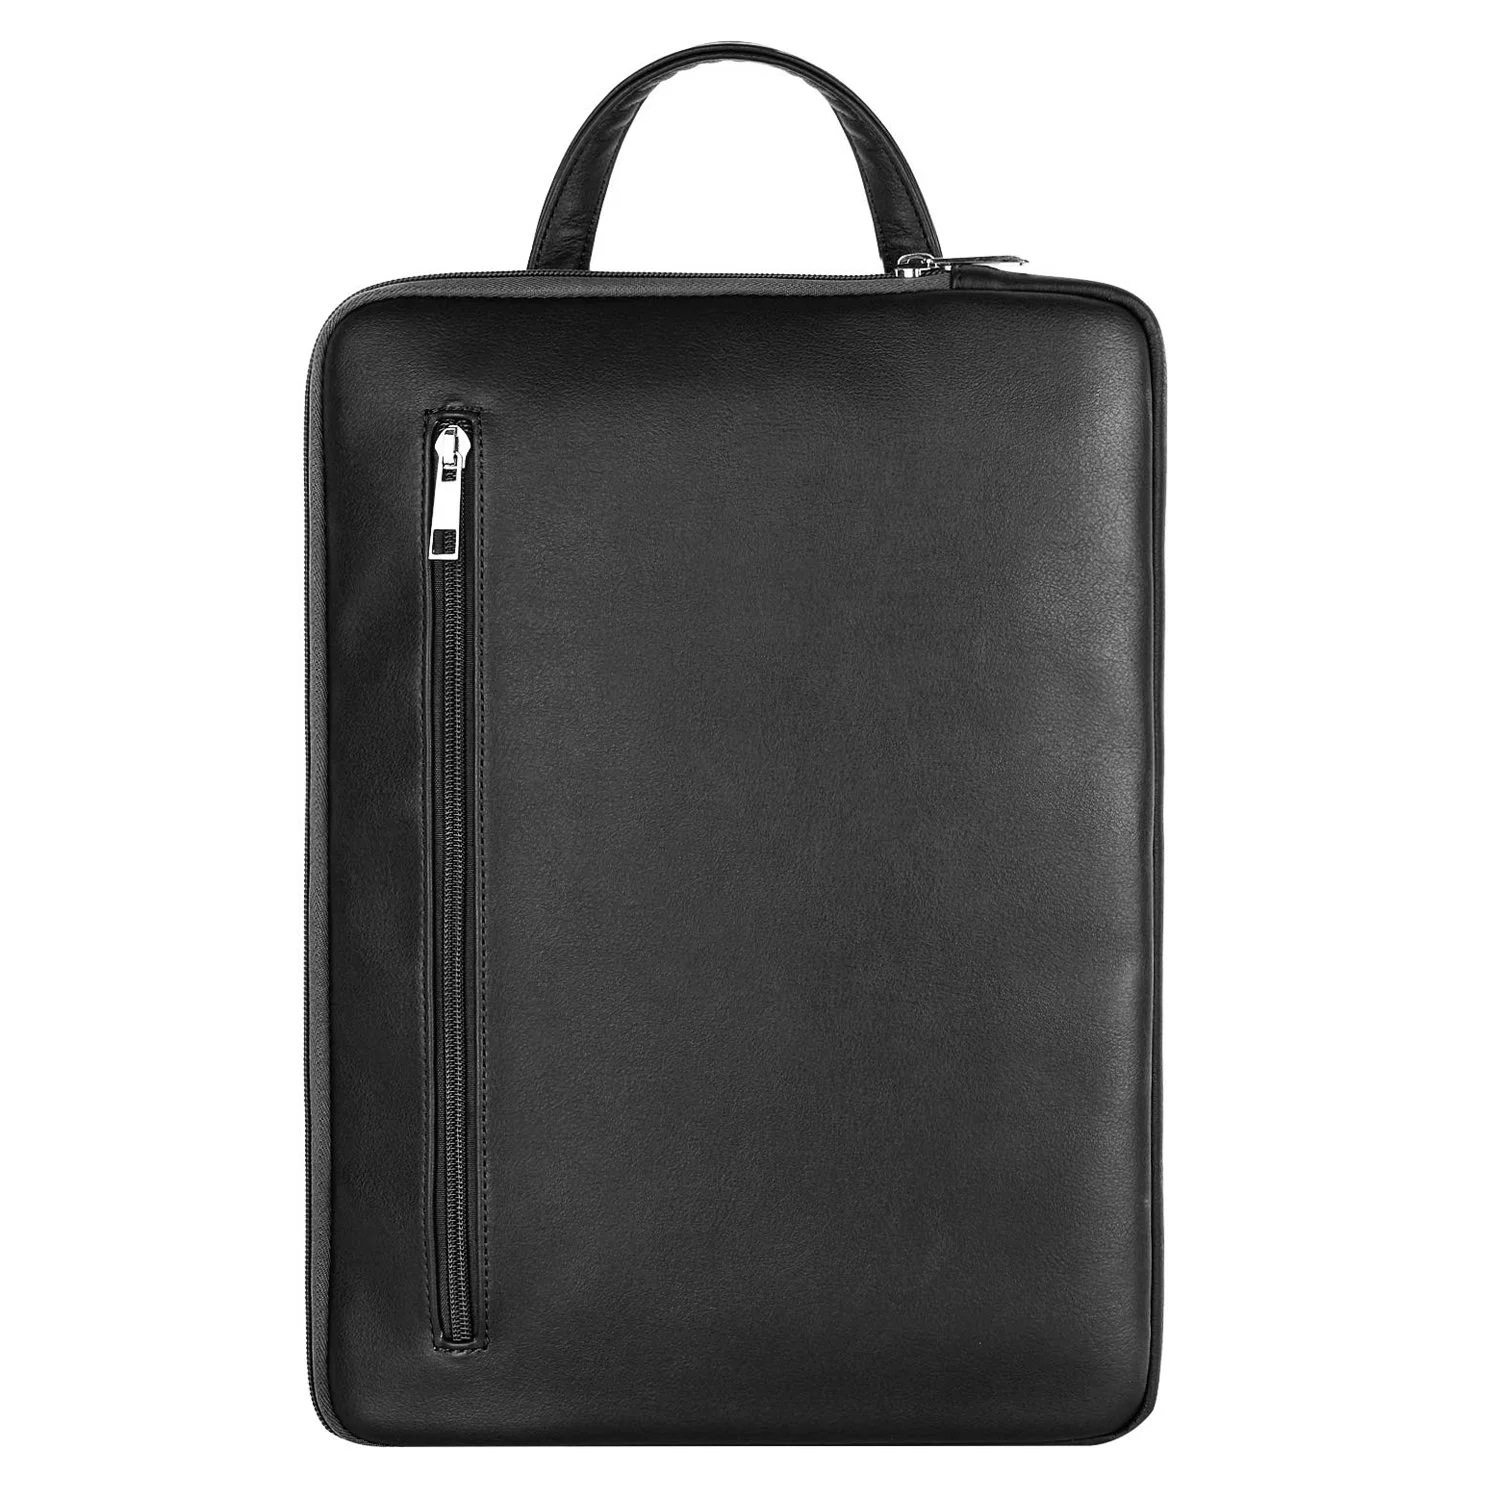 Wholesale/Supplier 2021 New Design Laptop Sleeve Bag with Handle PU Leather Carrying Case Bag for 13-13.5 Inch Briefcase Computer Sleeve